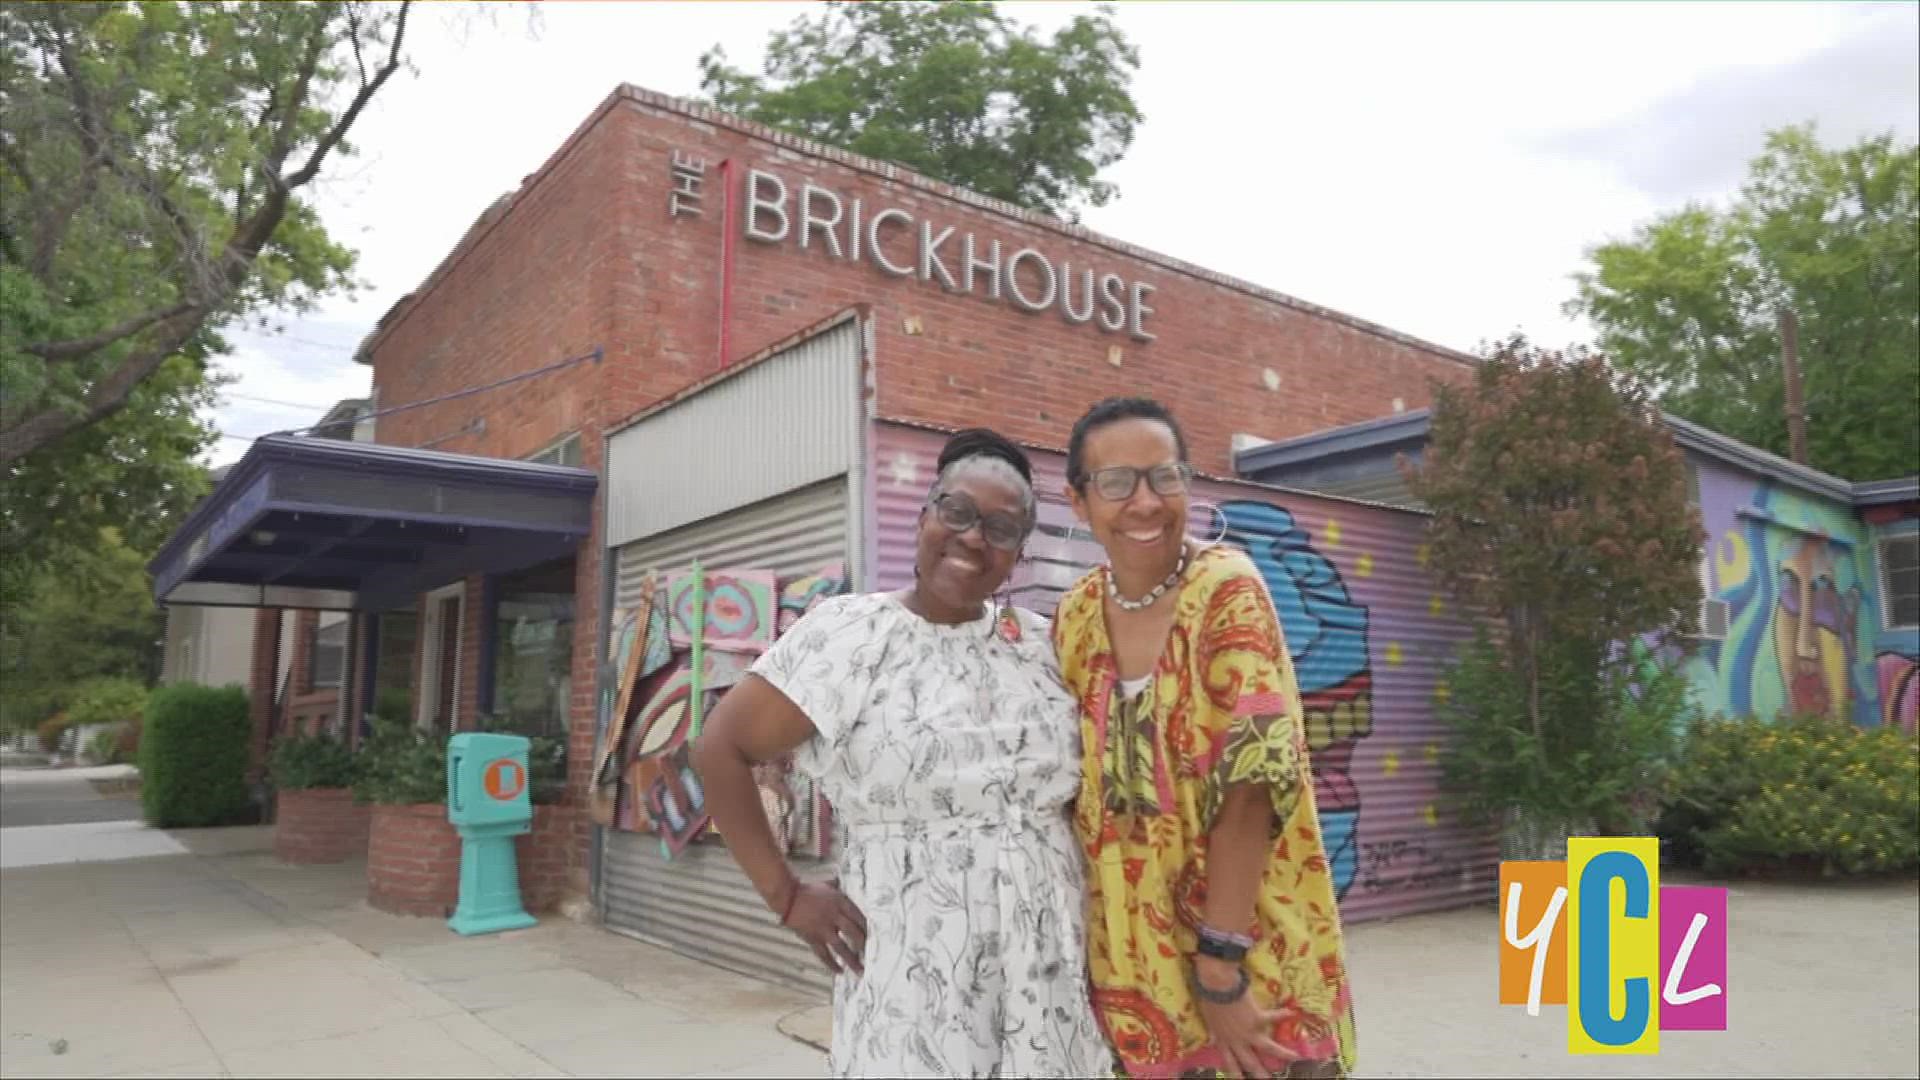 The Brickhouse Gallery and Art Complex has an off-grid approach to the arts. Its' rustic charm focuses on the work of established and promising creatives!